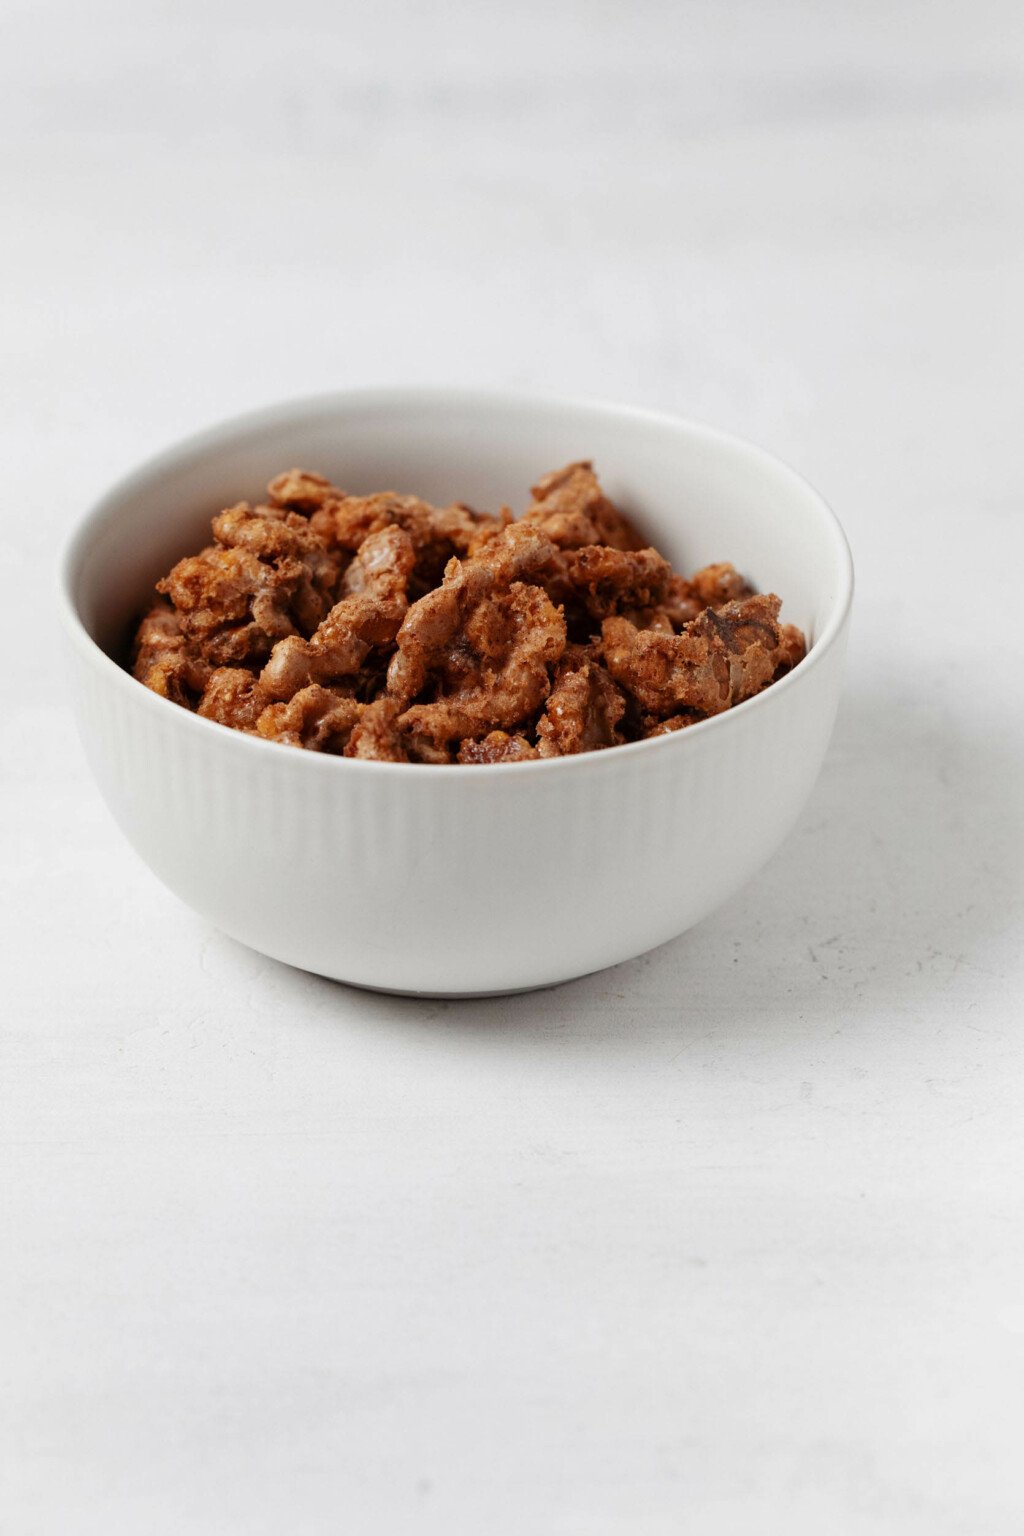 A small, round white bowl holds crispy, baked vegan candied walnuts.